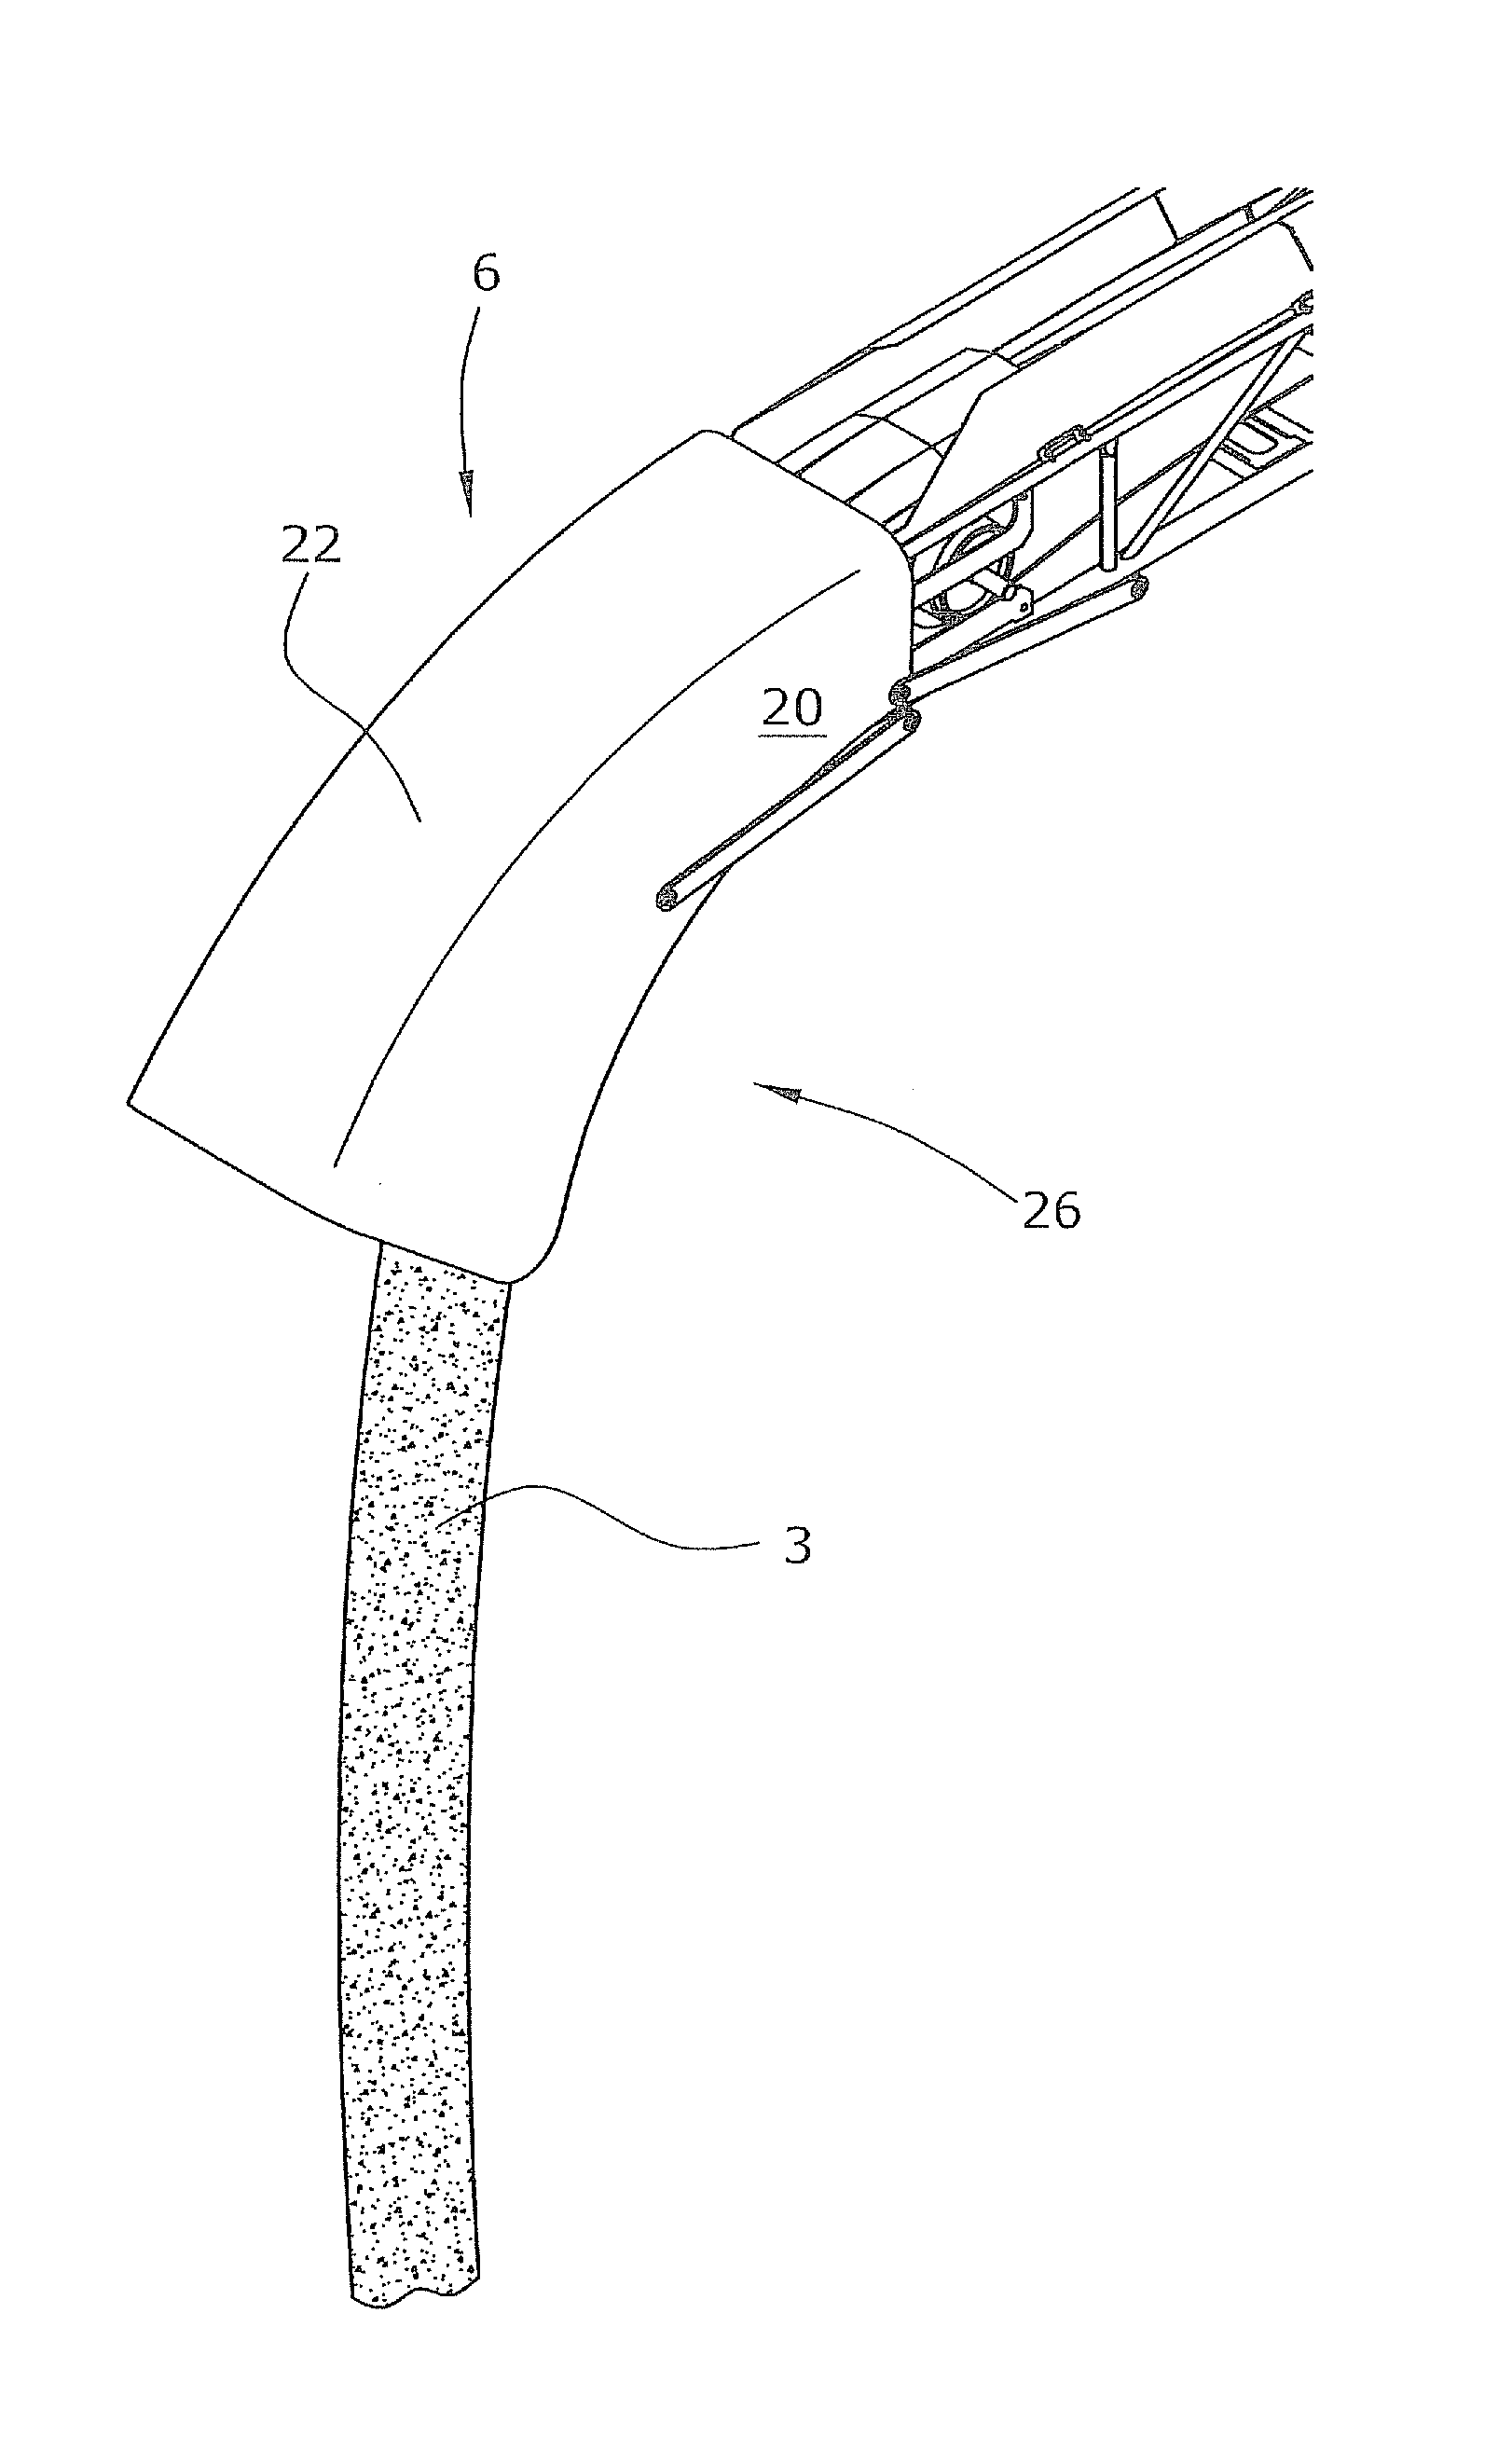 Self-propelled cold milling machine, as well as method for milling off and transporting away a milled-off stream of material